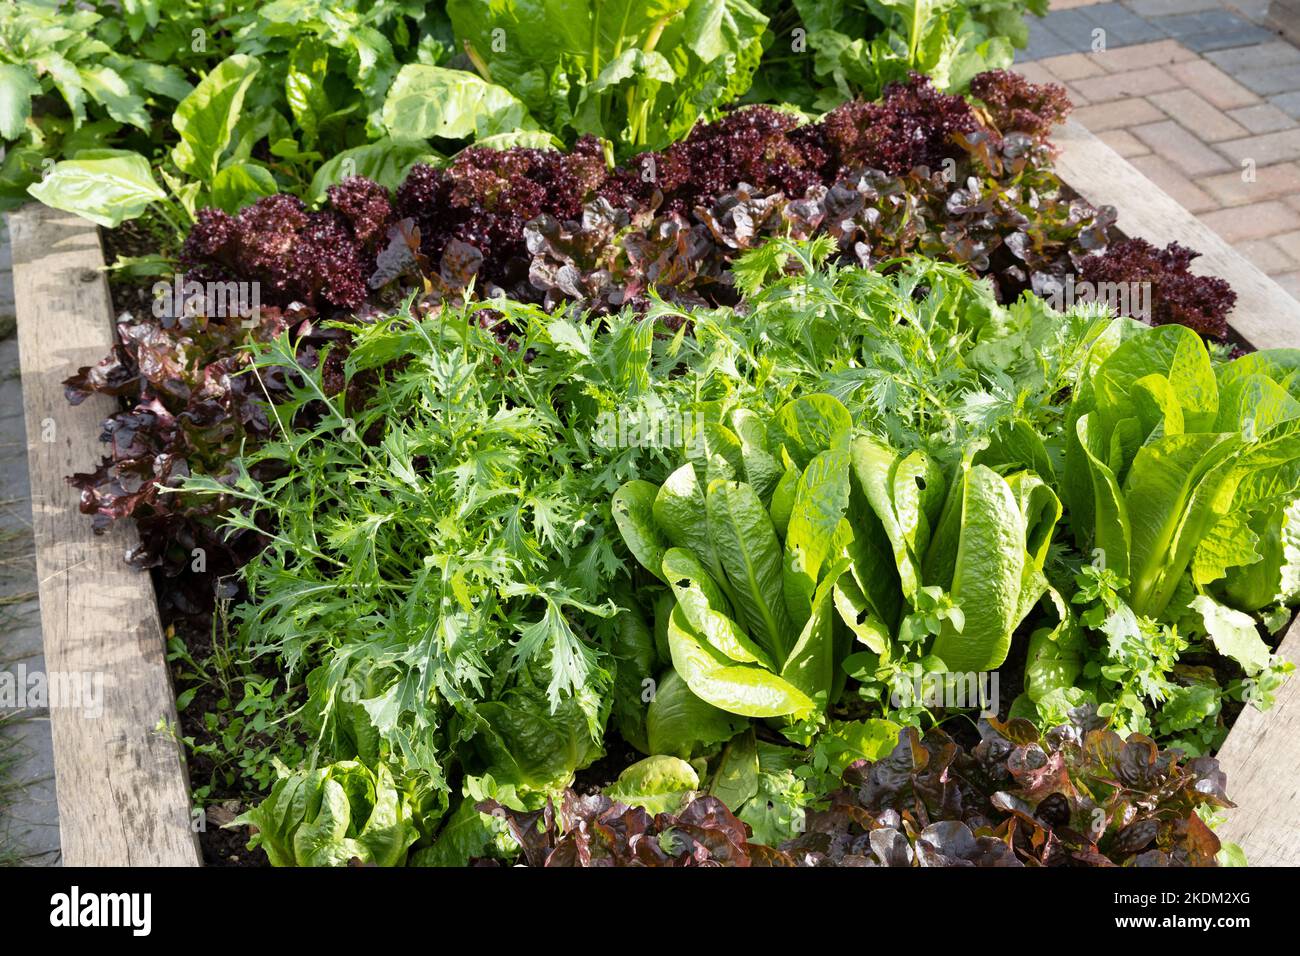 Home grown produce UK; red and green lettuce varieties growing in a raised bed in a private garden, Suffolk UK Stock Photo